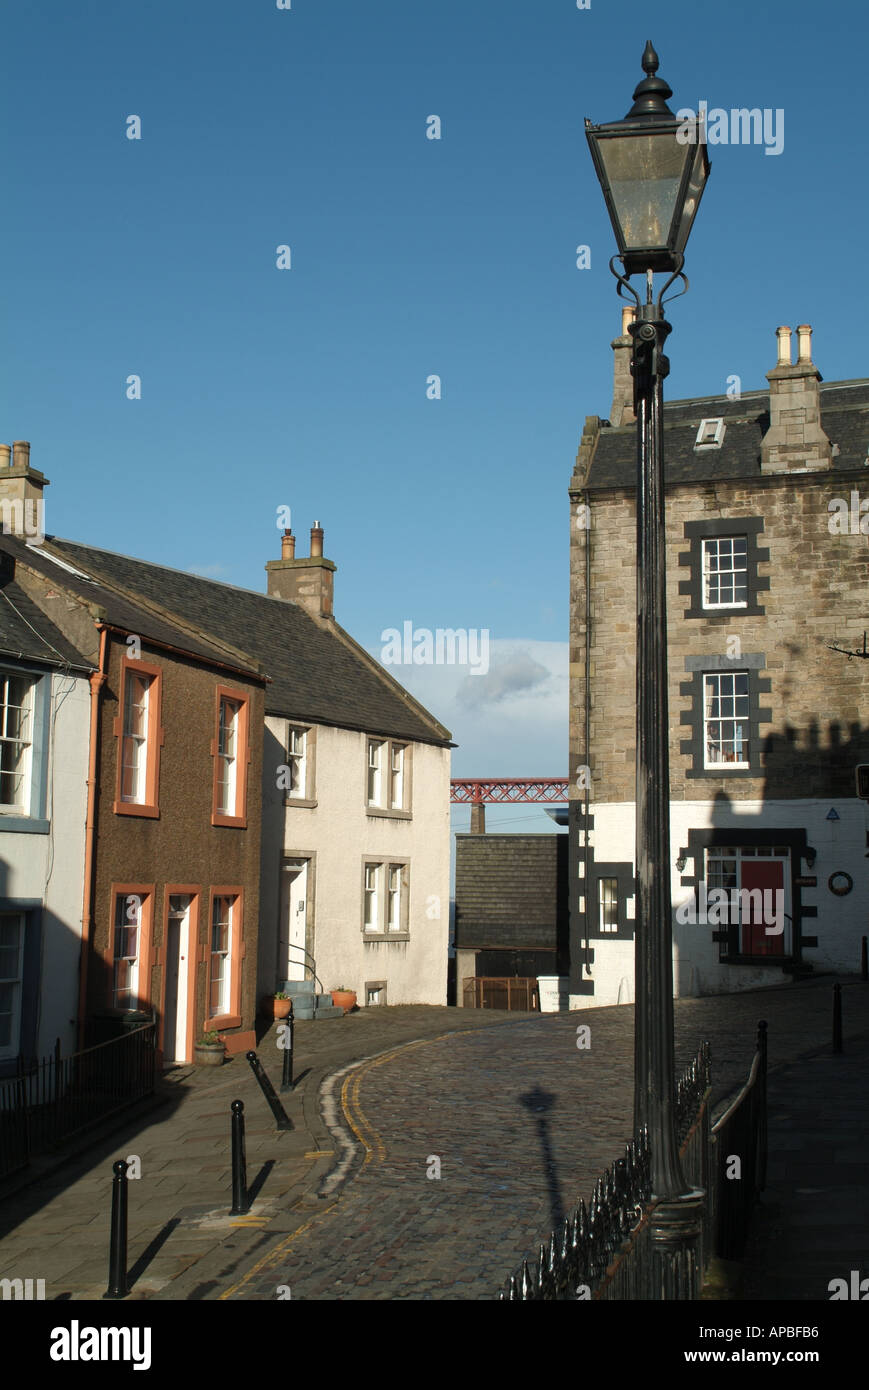 The east end of the High Street, South Queensferry, Edinburgh, Scotland, UK. Stock Photo